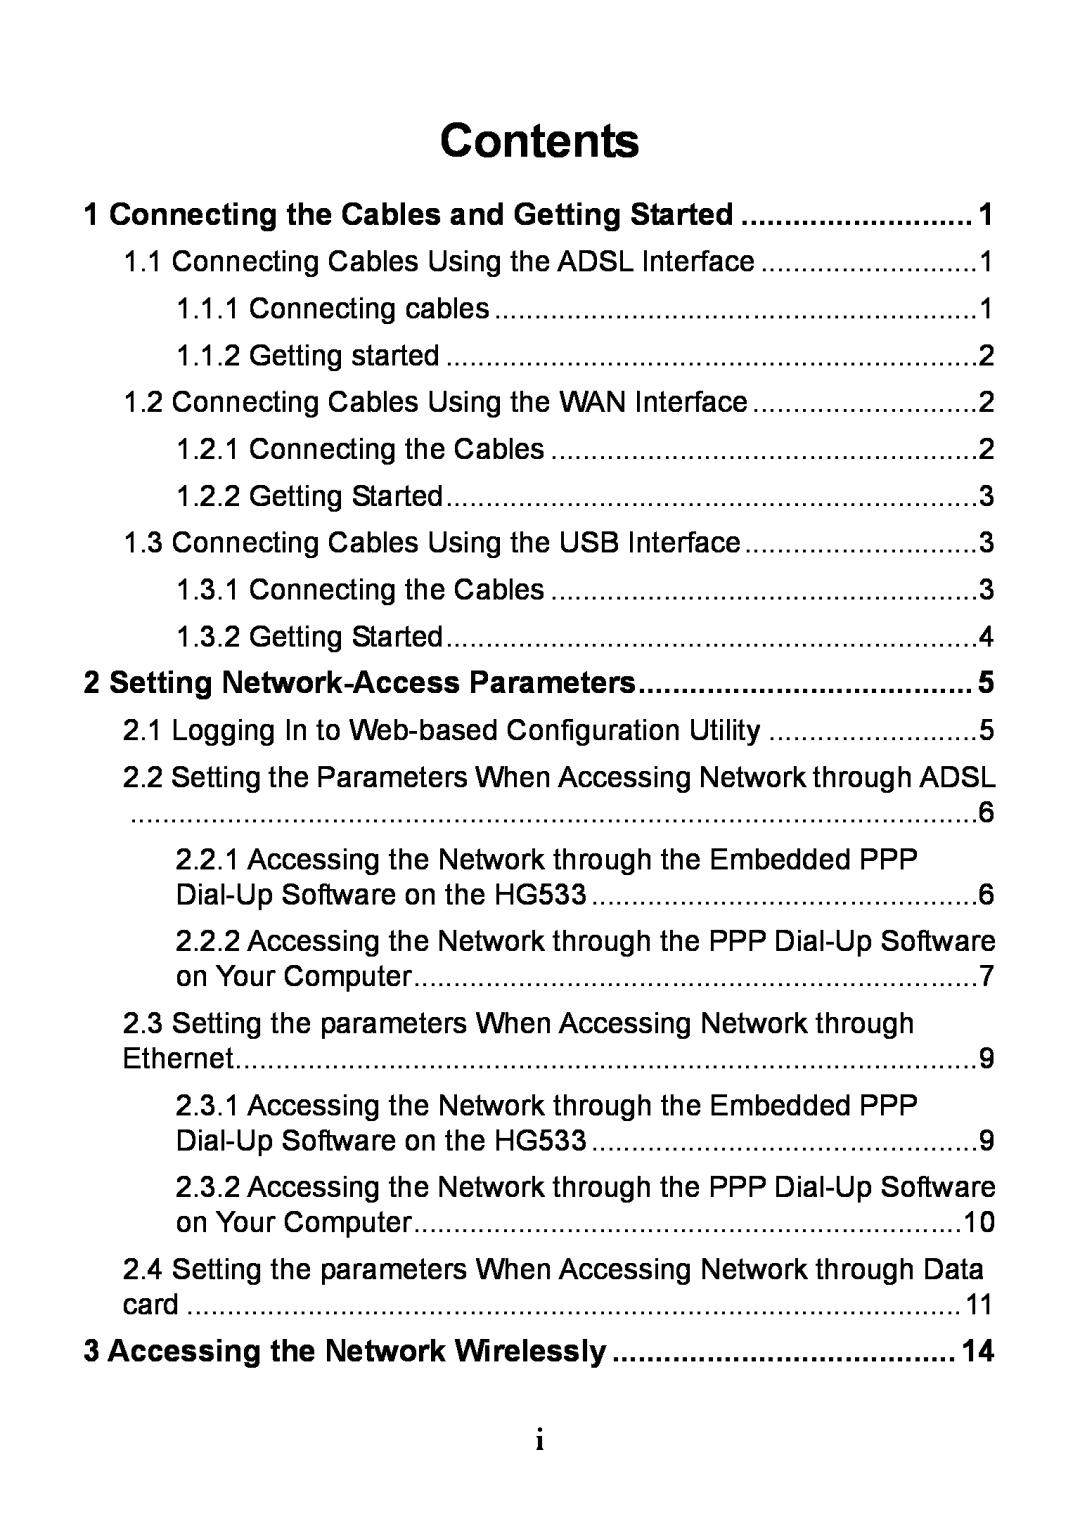 Huawei V100R001 manual Contents, Connecting the Cables and Getting Started, Setting Network-Access Parameters 